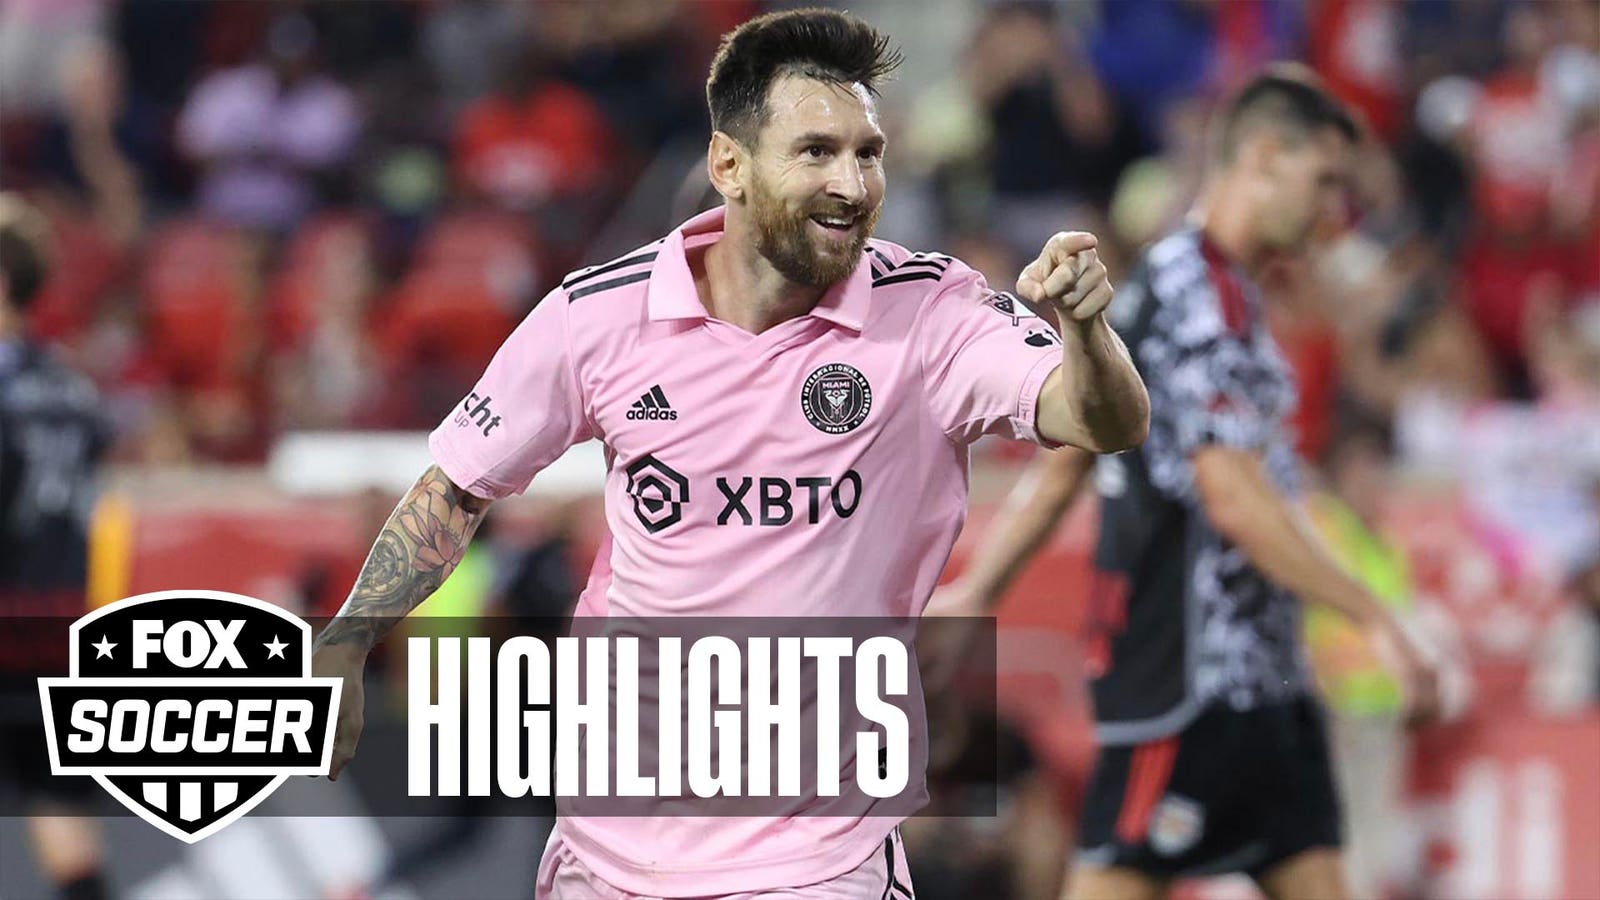 Inter Miami's Messi and Cremaschi link up for a BEAUTIFUL goal vs. Red Bulls